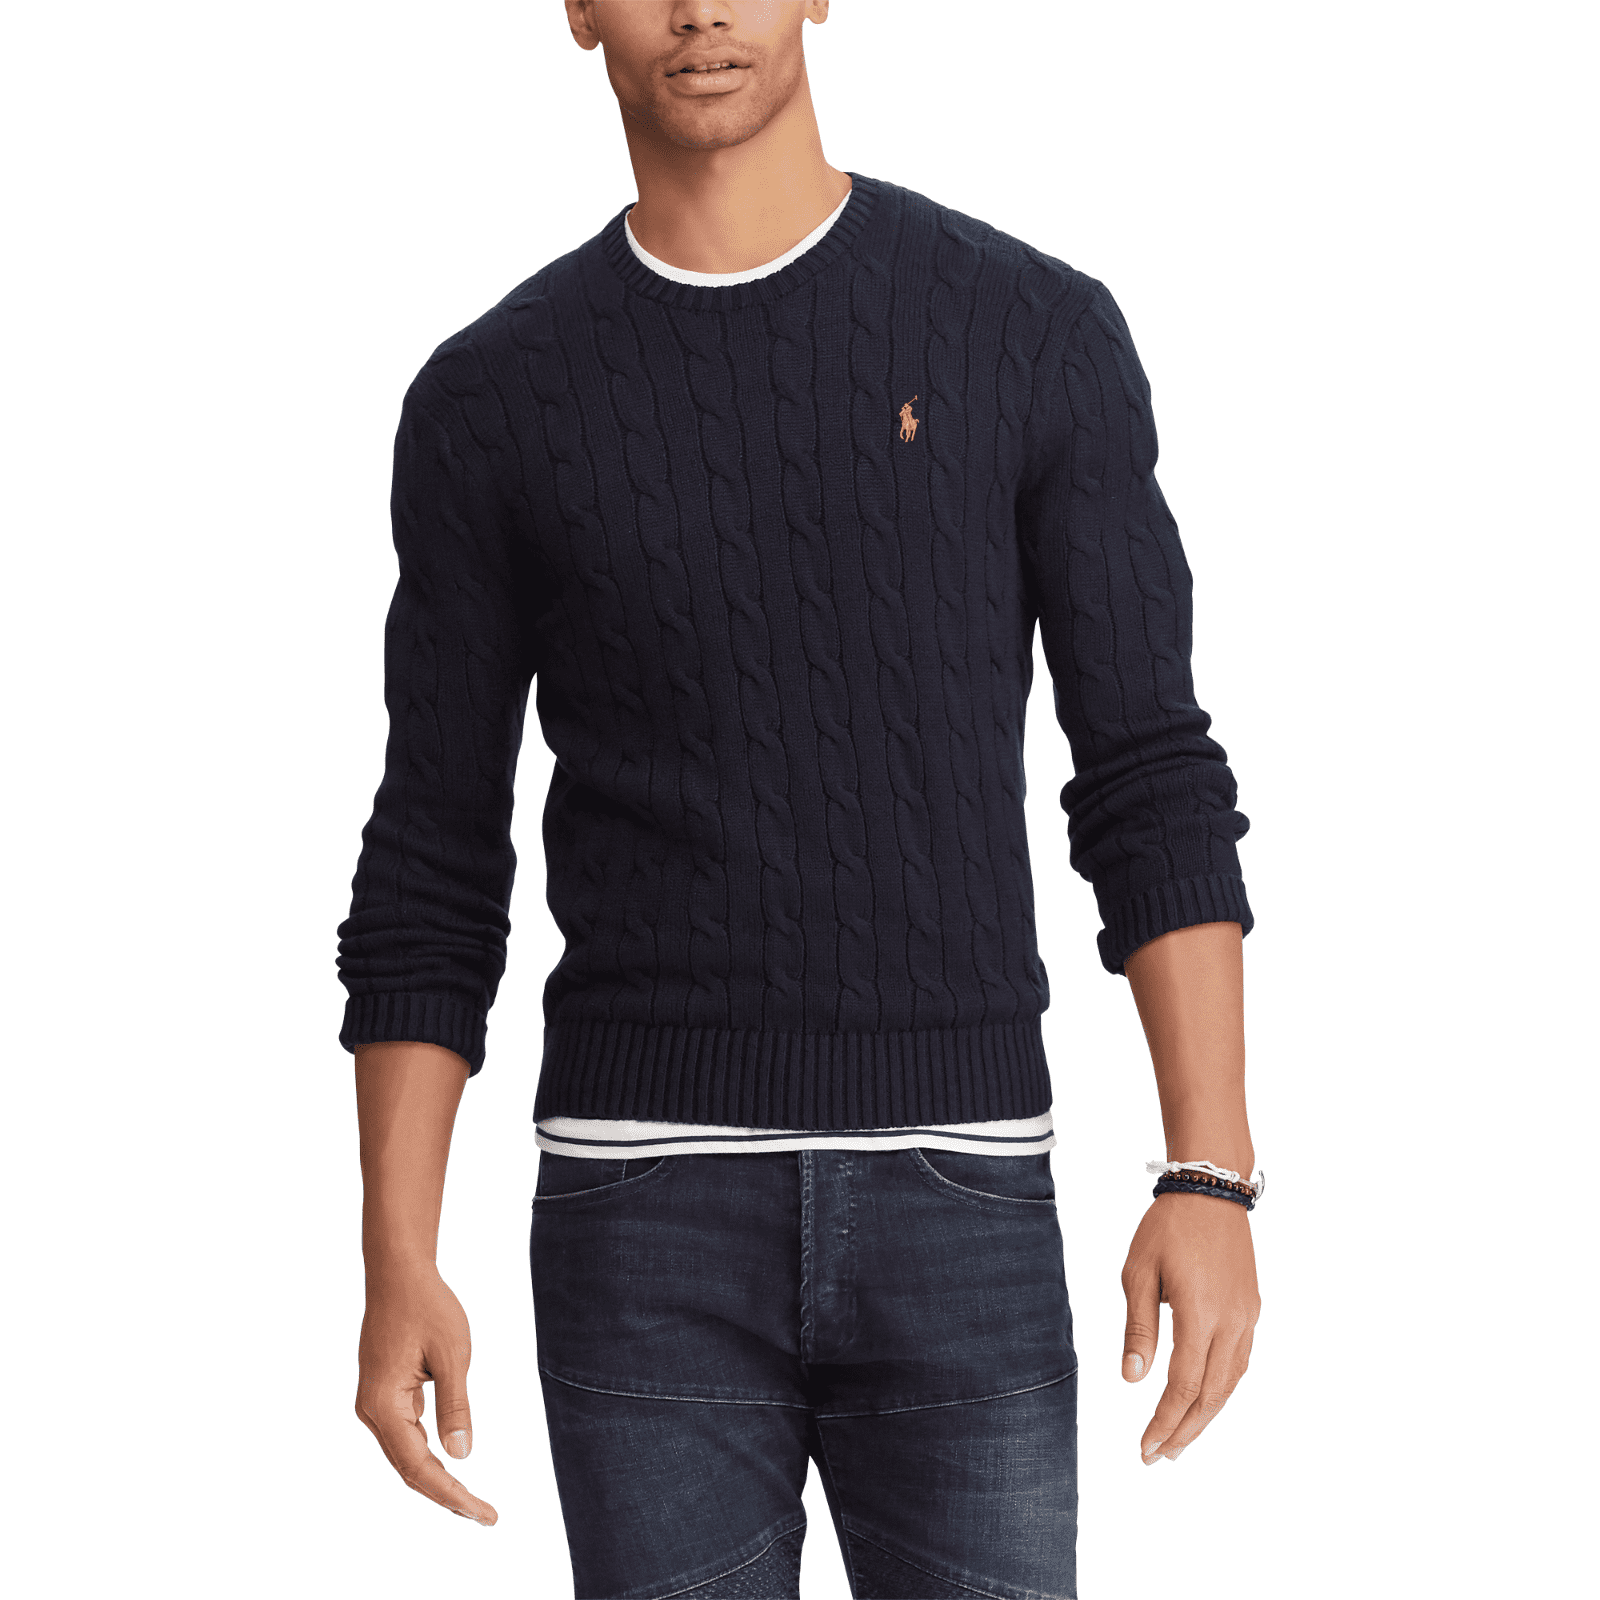 Polo Ralph Lauren Men's Big Tall Cable-Knit Cotton Sweater Navy 